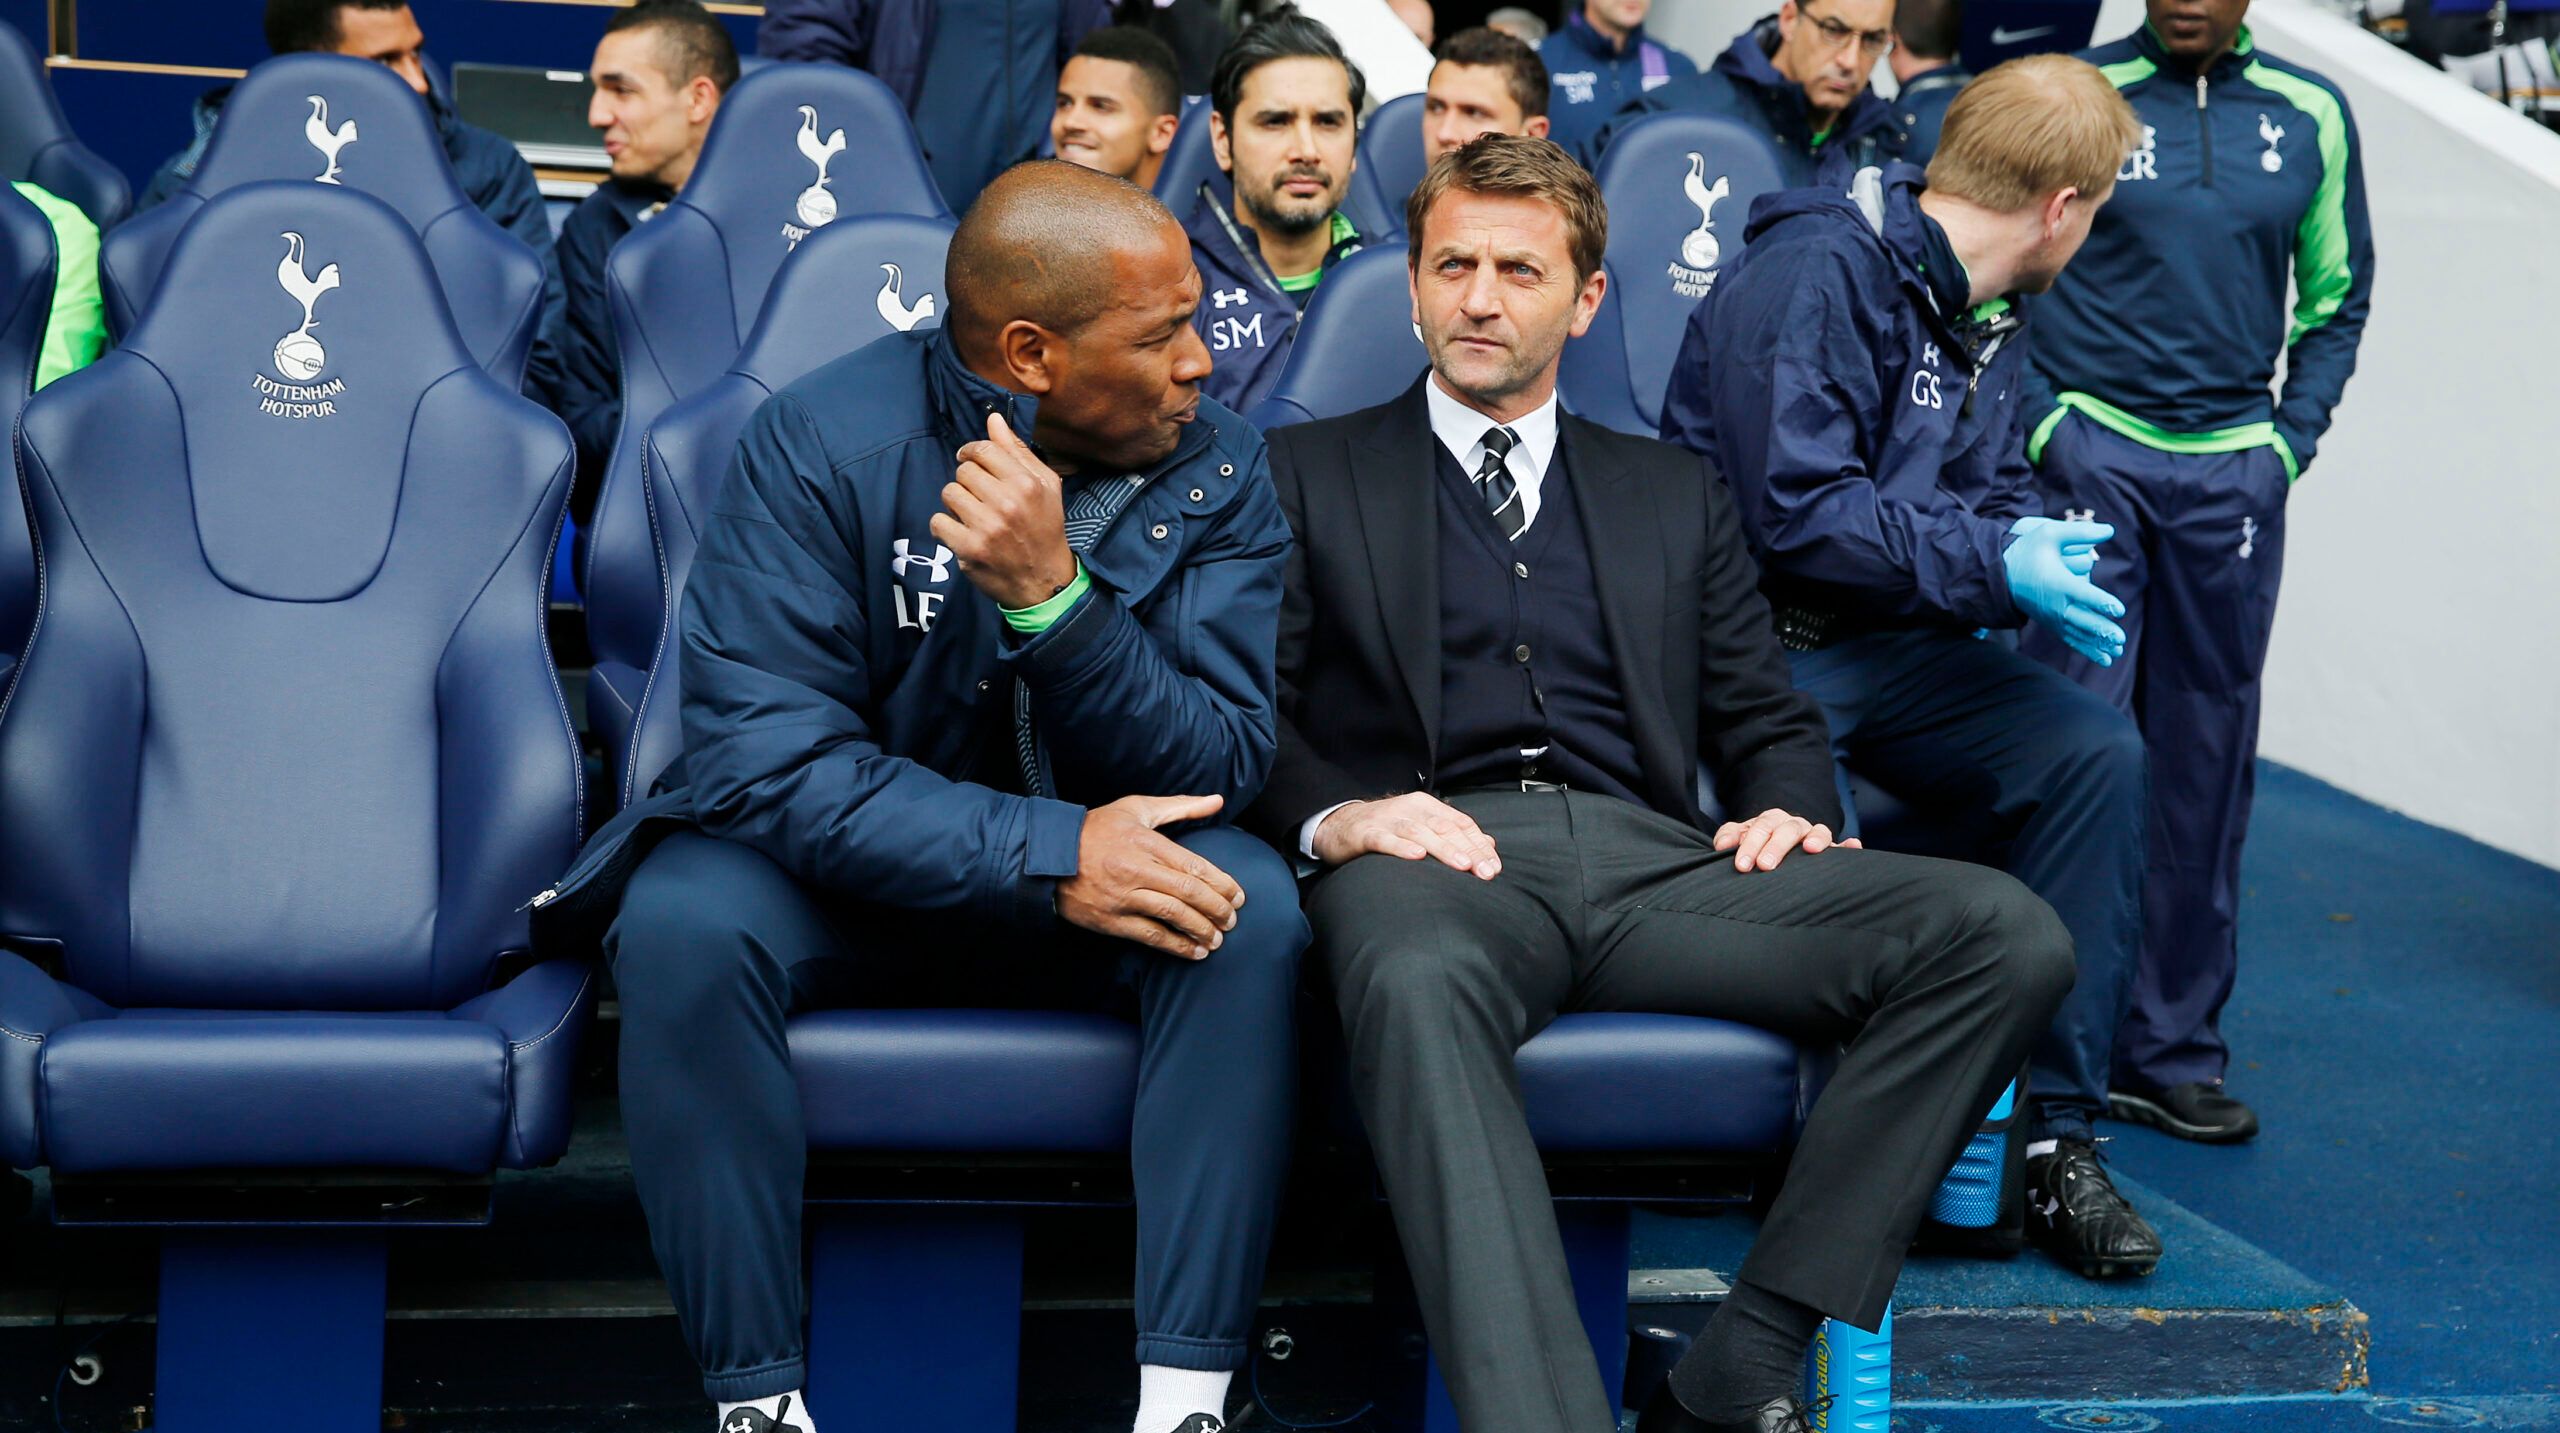 Football - Tottenham Hotspur v Aston Villa - Barclays Premier League - White Hart Lane - 11/5/14 
Tottenham manager Tim Sherwood (R) and coach Les Ferdinand  
Mandatory Credit: Action Images / Andrew Couldridge 
Livepic 
EDITORIAL USE ONLY. No use with unauthorized audio, video, data, fixture lists, club/league logos or 